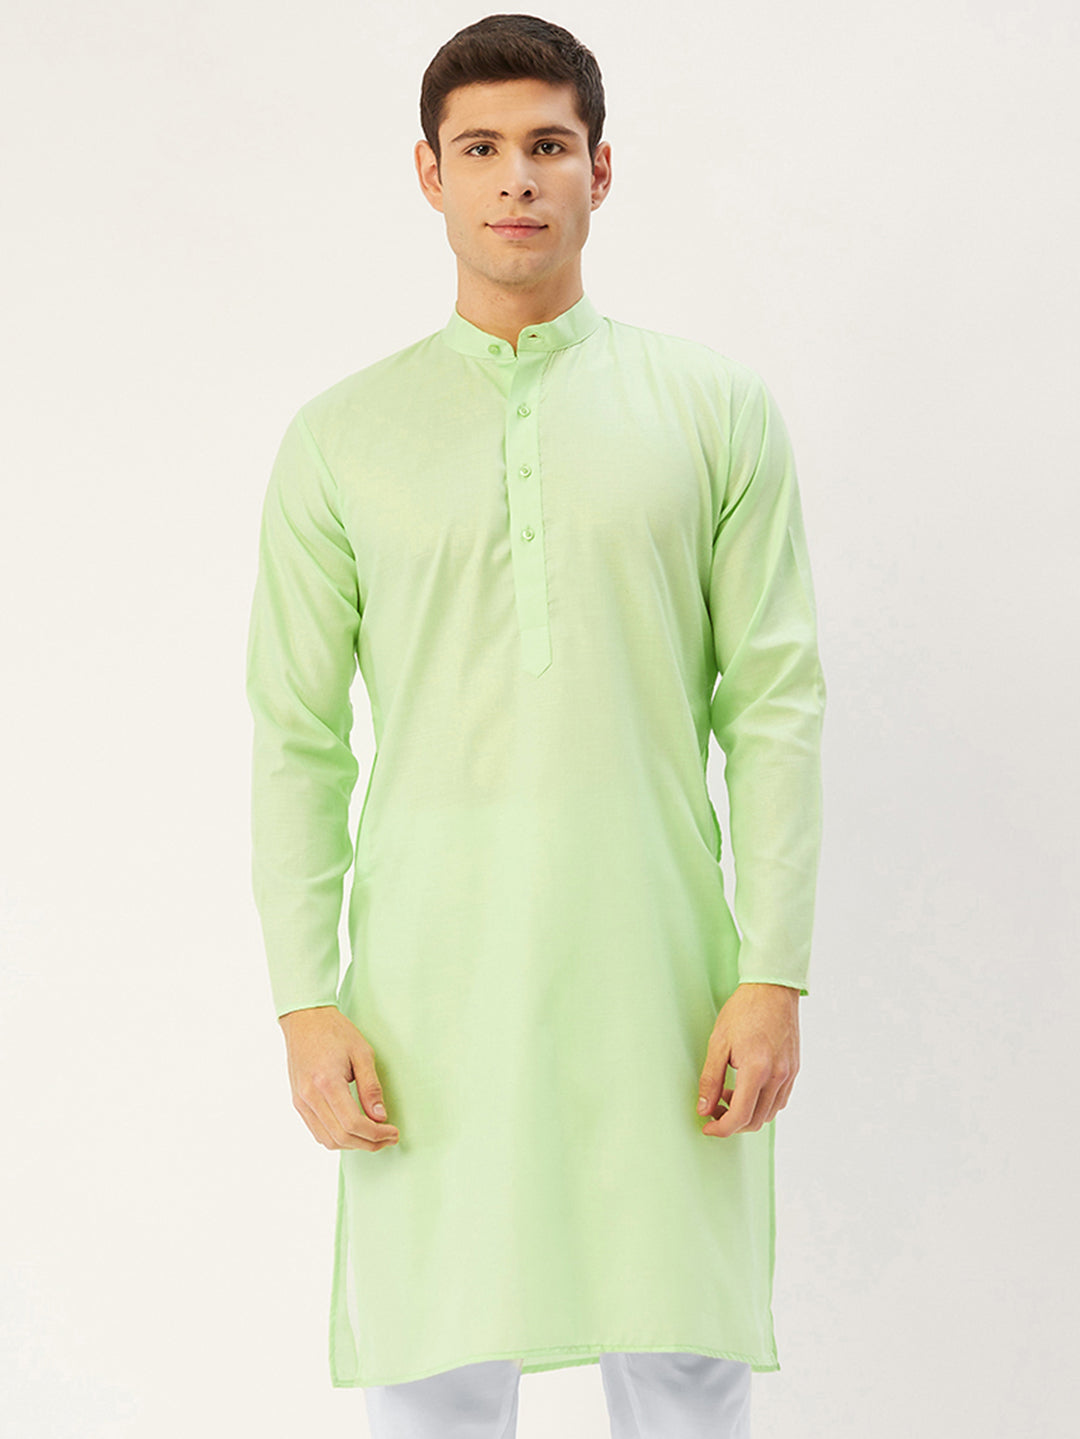 Jompers Men's Lime Cotton Solid Kurta Only